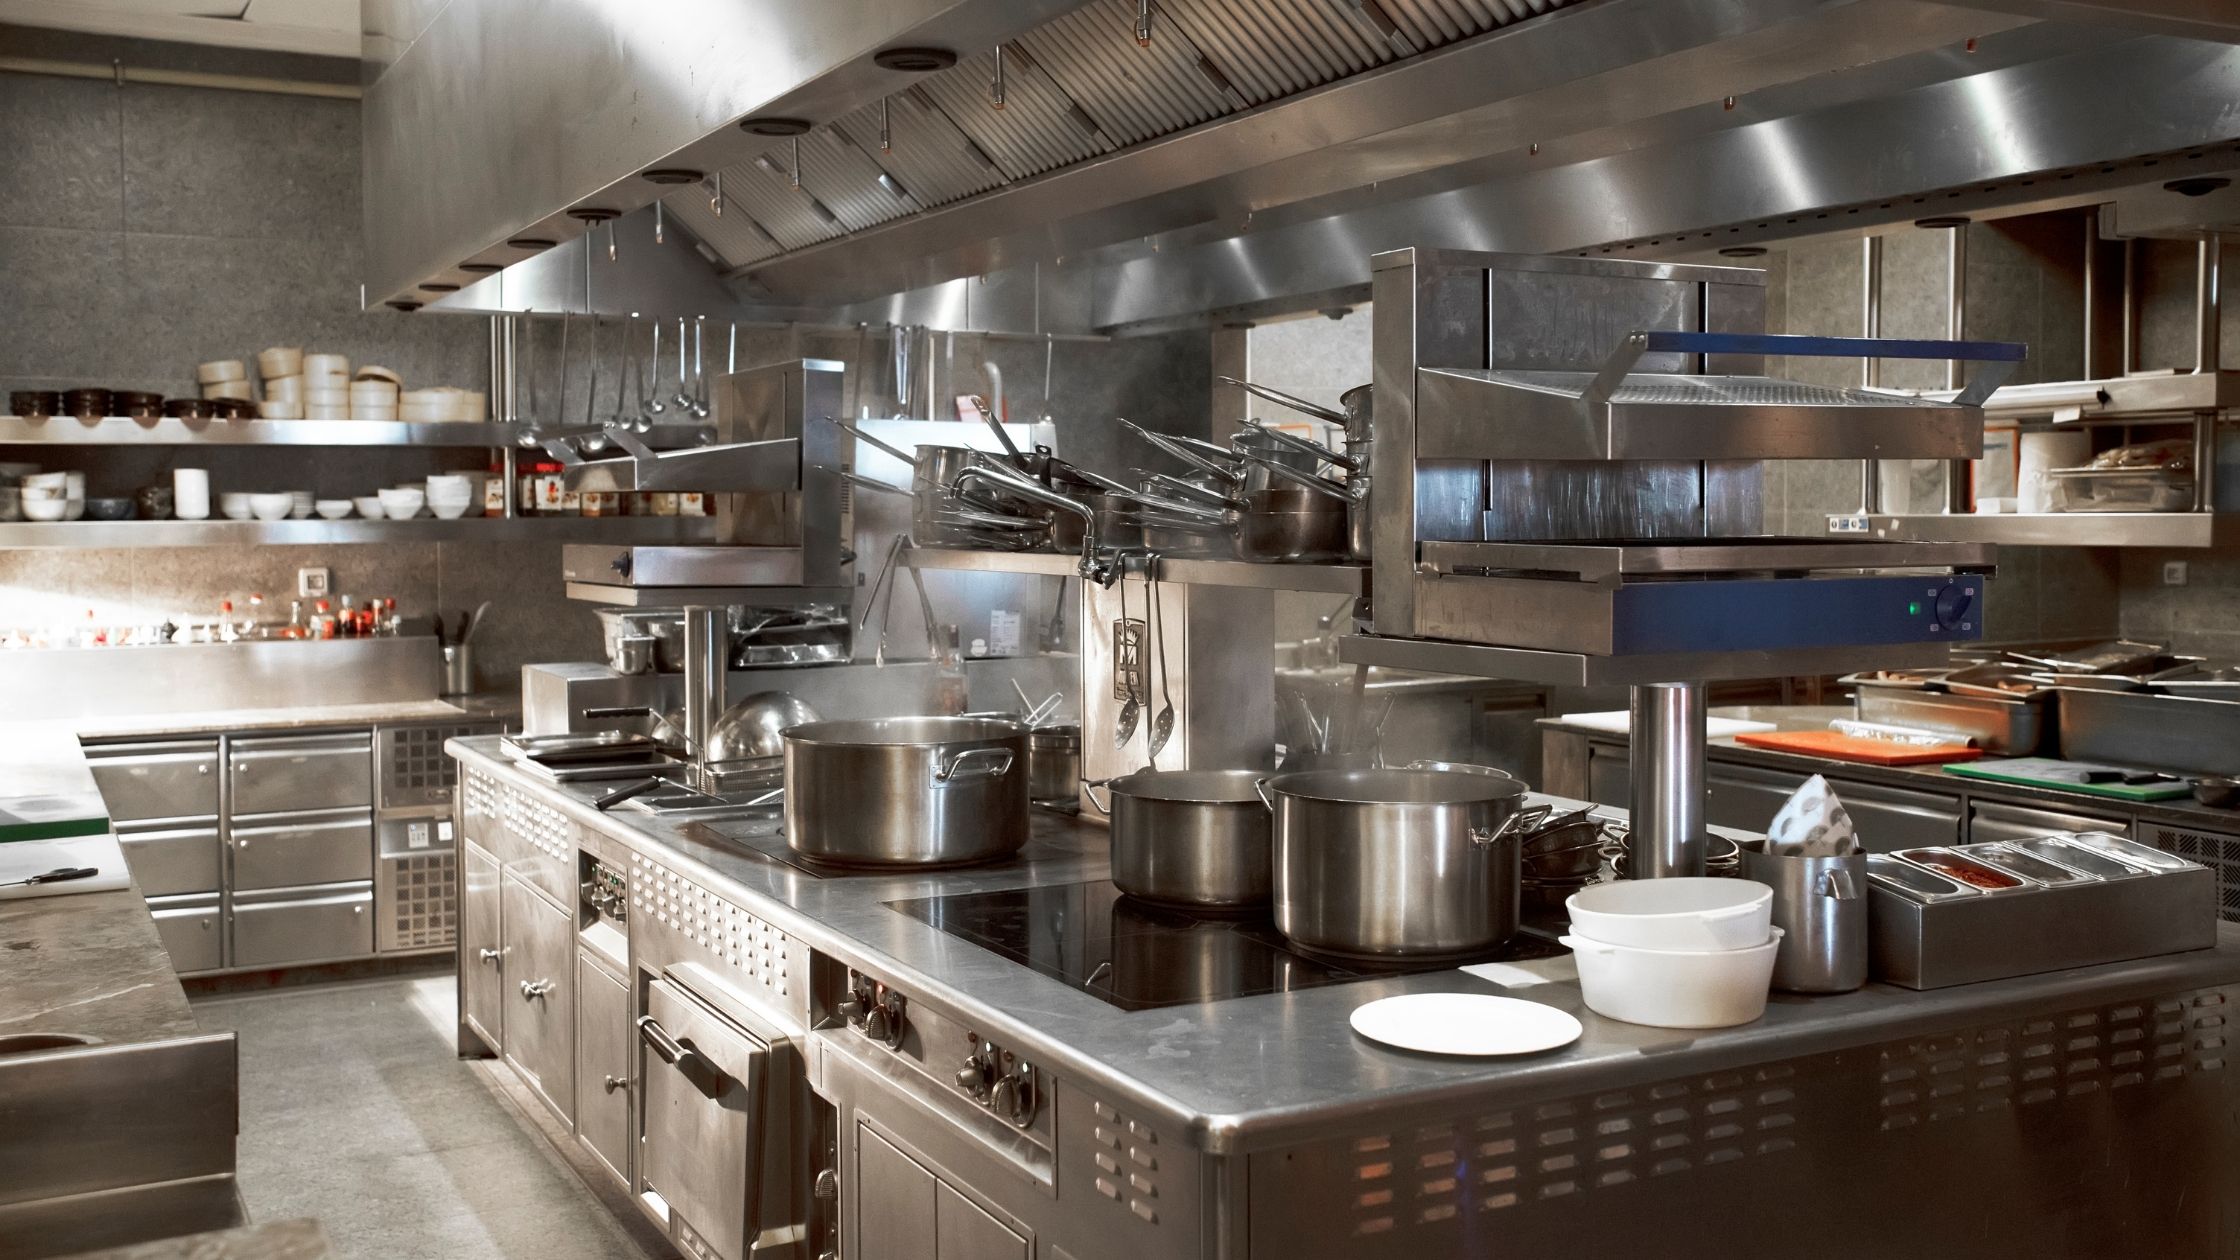 The four categories of Commercial Kitchen Equipment